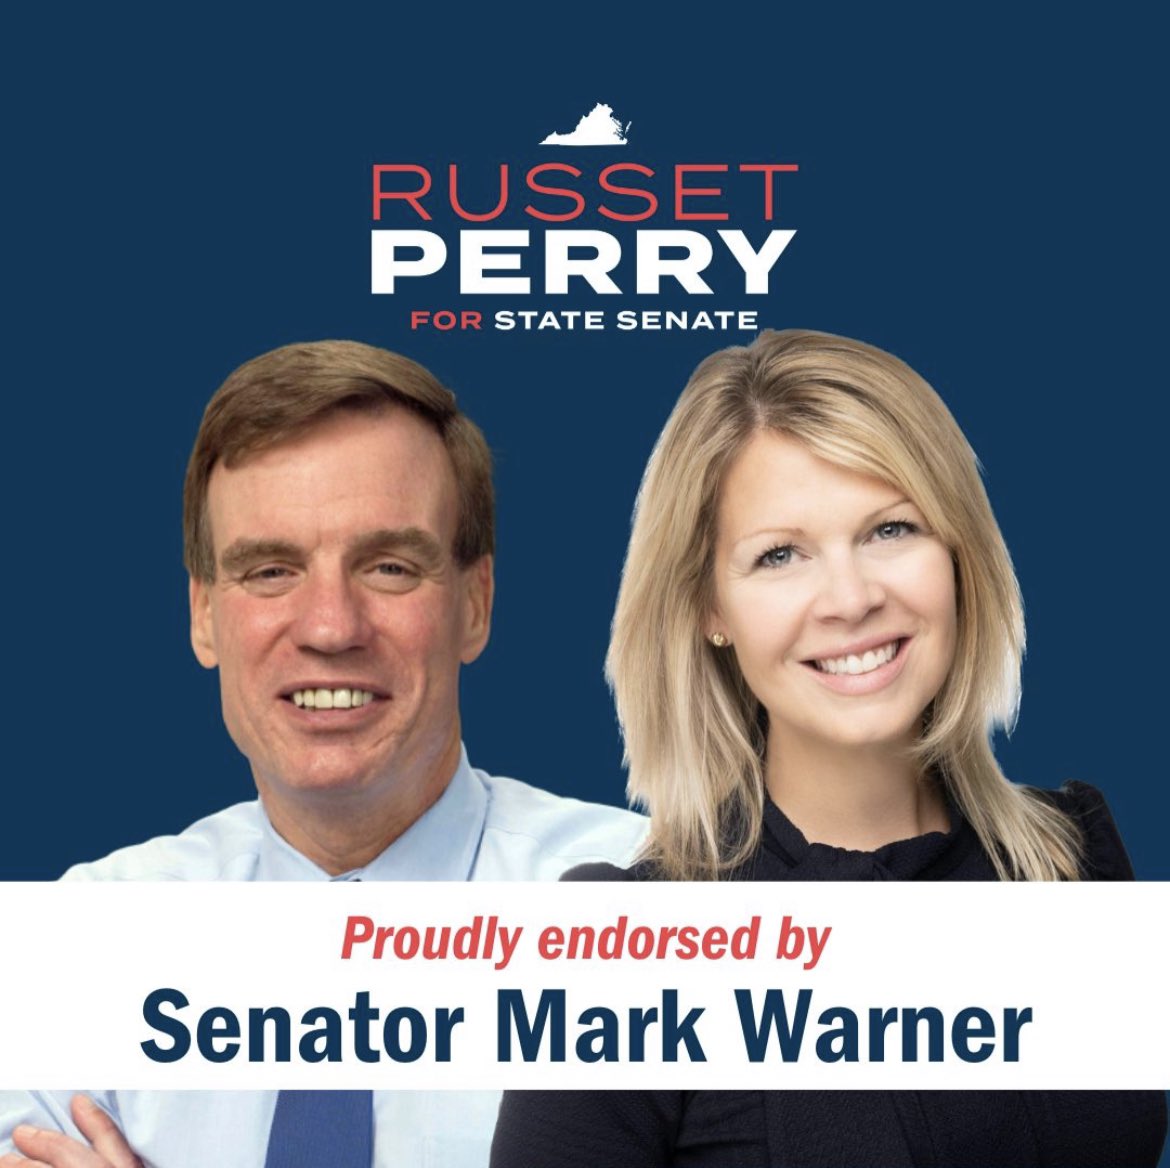 Proud to have the endorsement of @MarkWarner: “Russet is a committed community leader who understands what the residents of SD-31 need to prosper in a rapidly changing economy.” #markwarner #virginiapolitics #vastatesenate #sd31